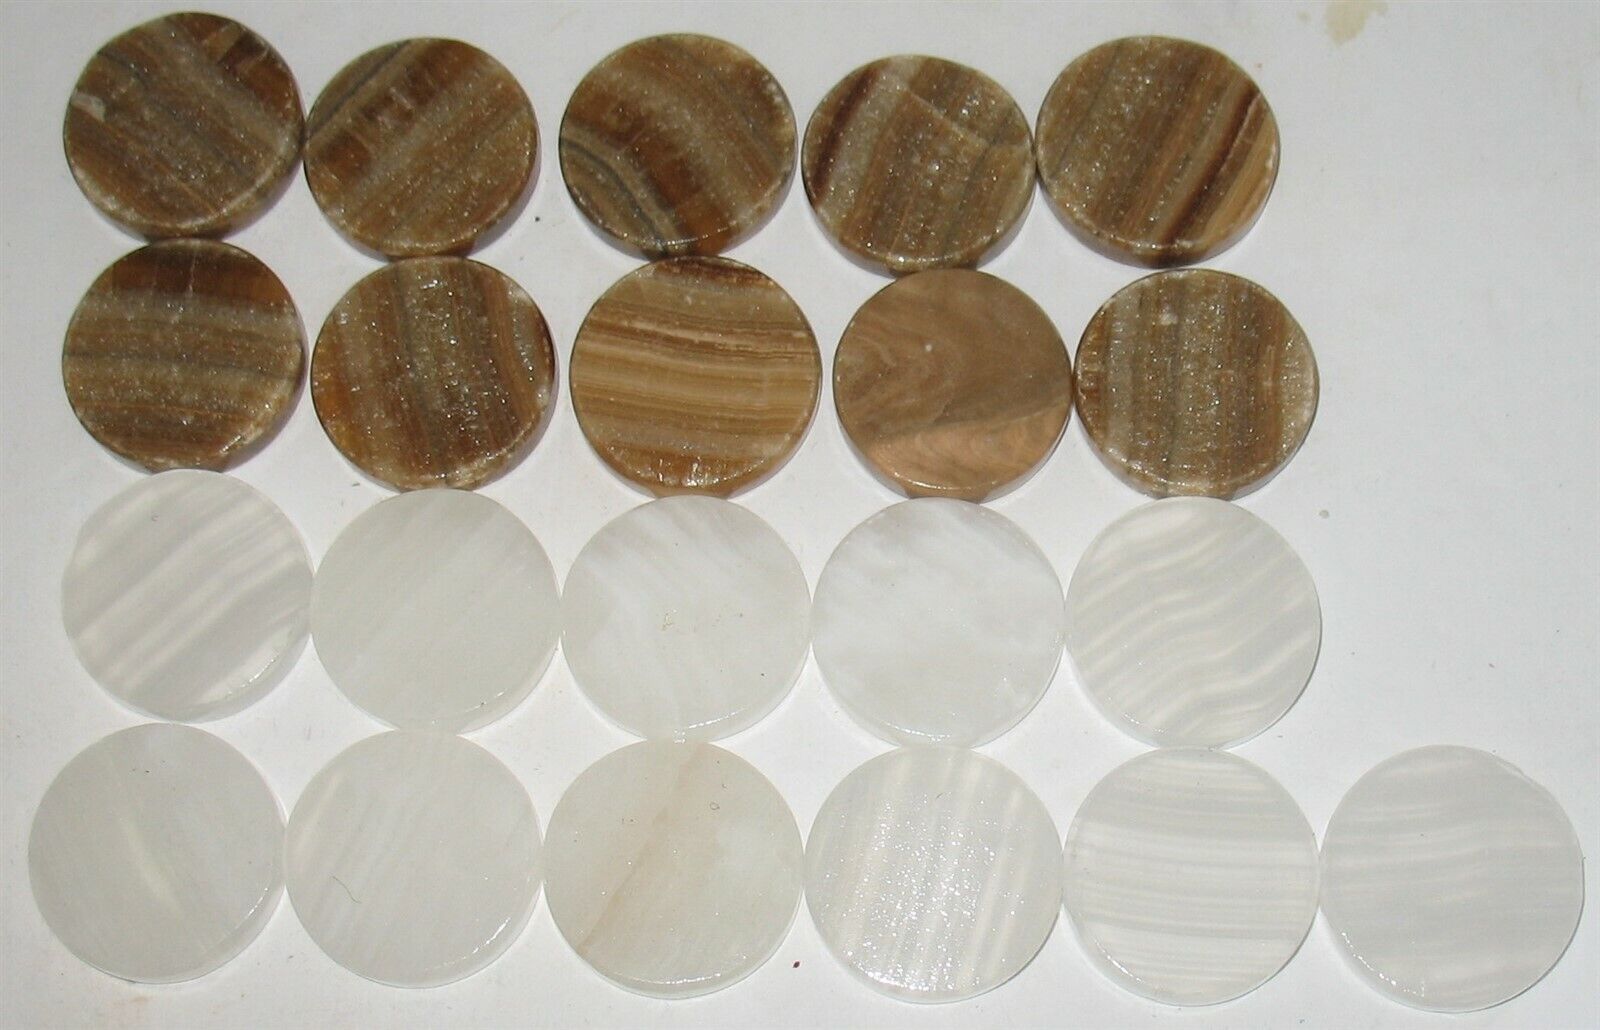 21 Pieces Vintage Brown & White Stone Checkers Replacement Parts Unbranded